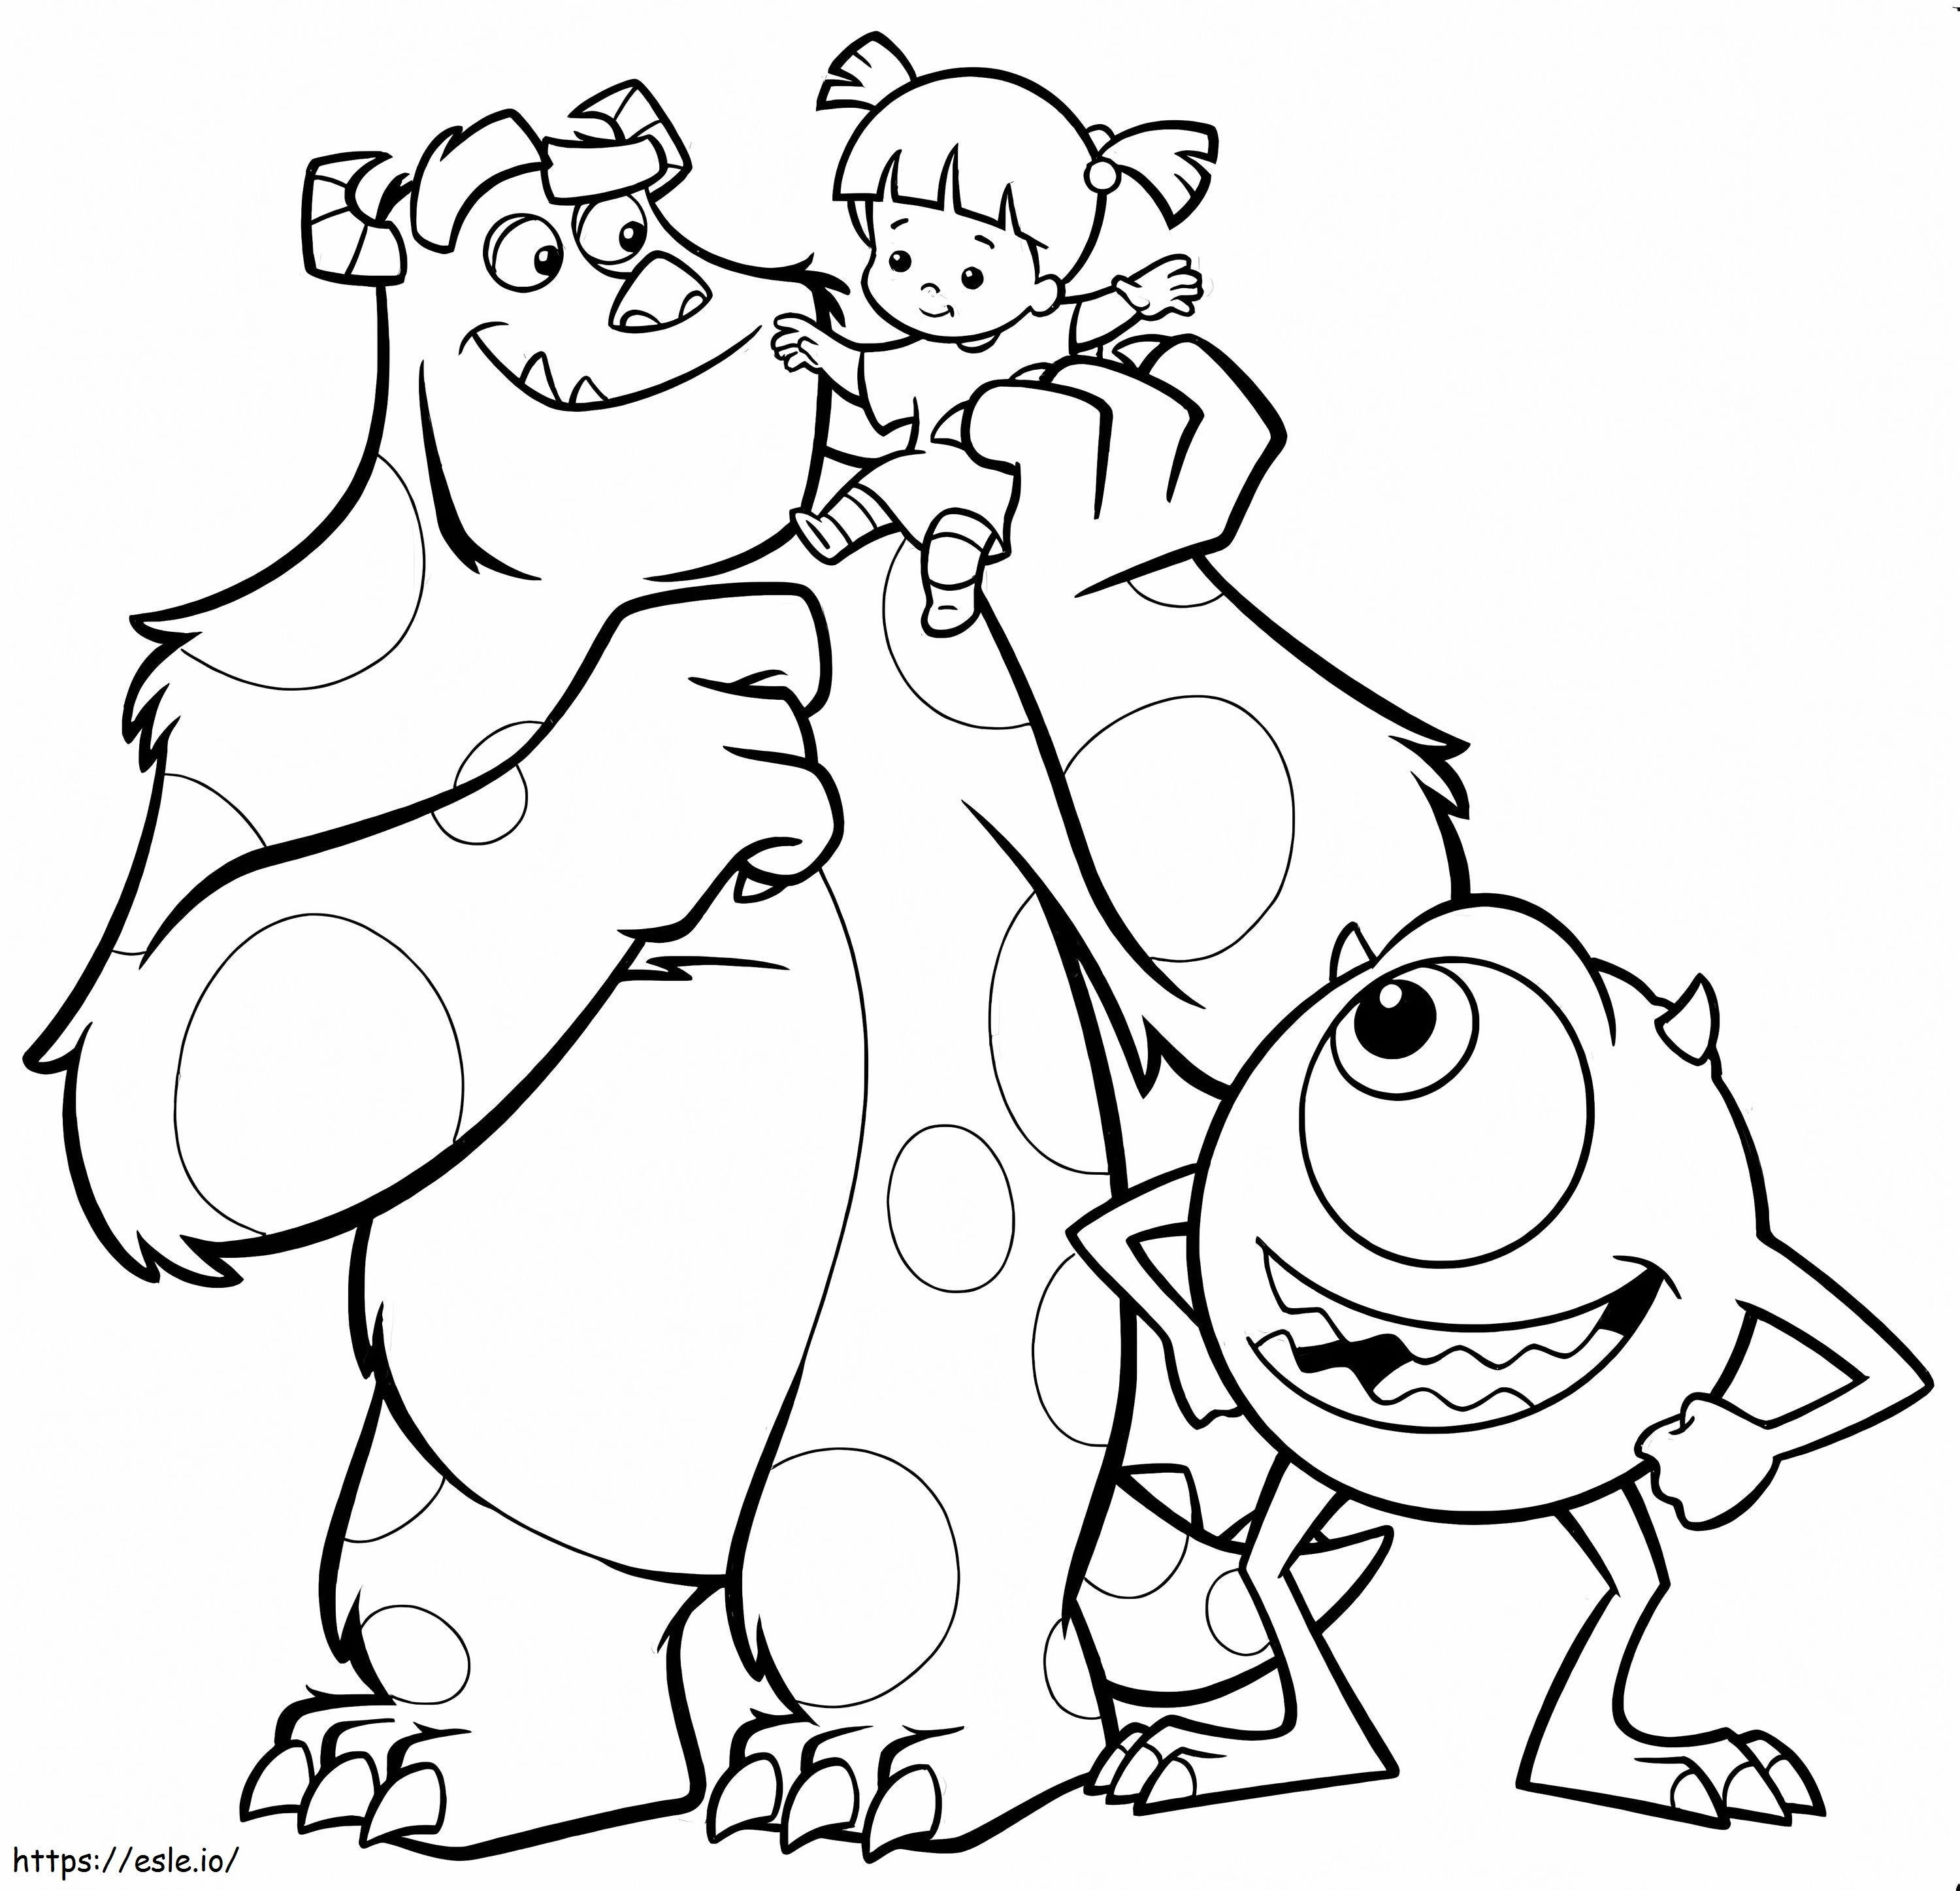 1531972179 Sulley Boo And Mike A4 coloring page